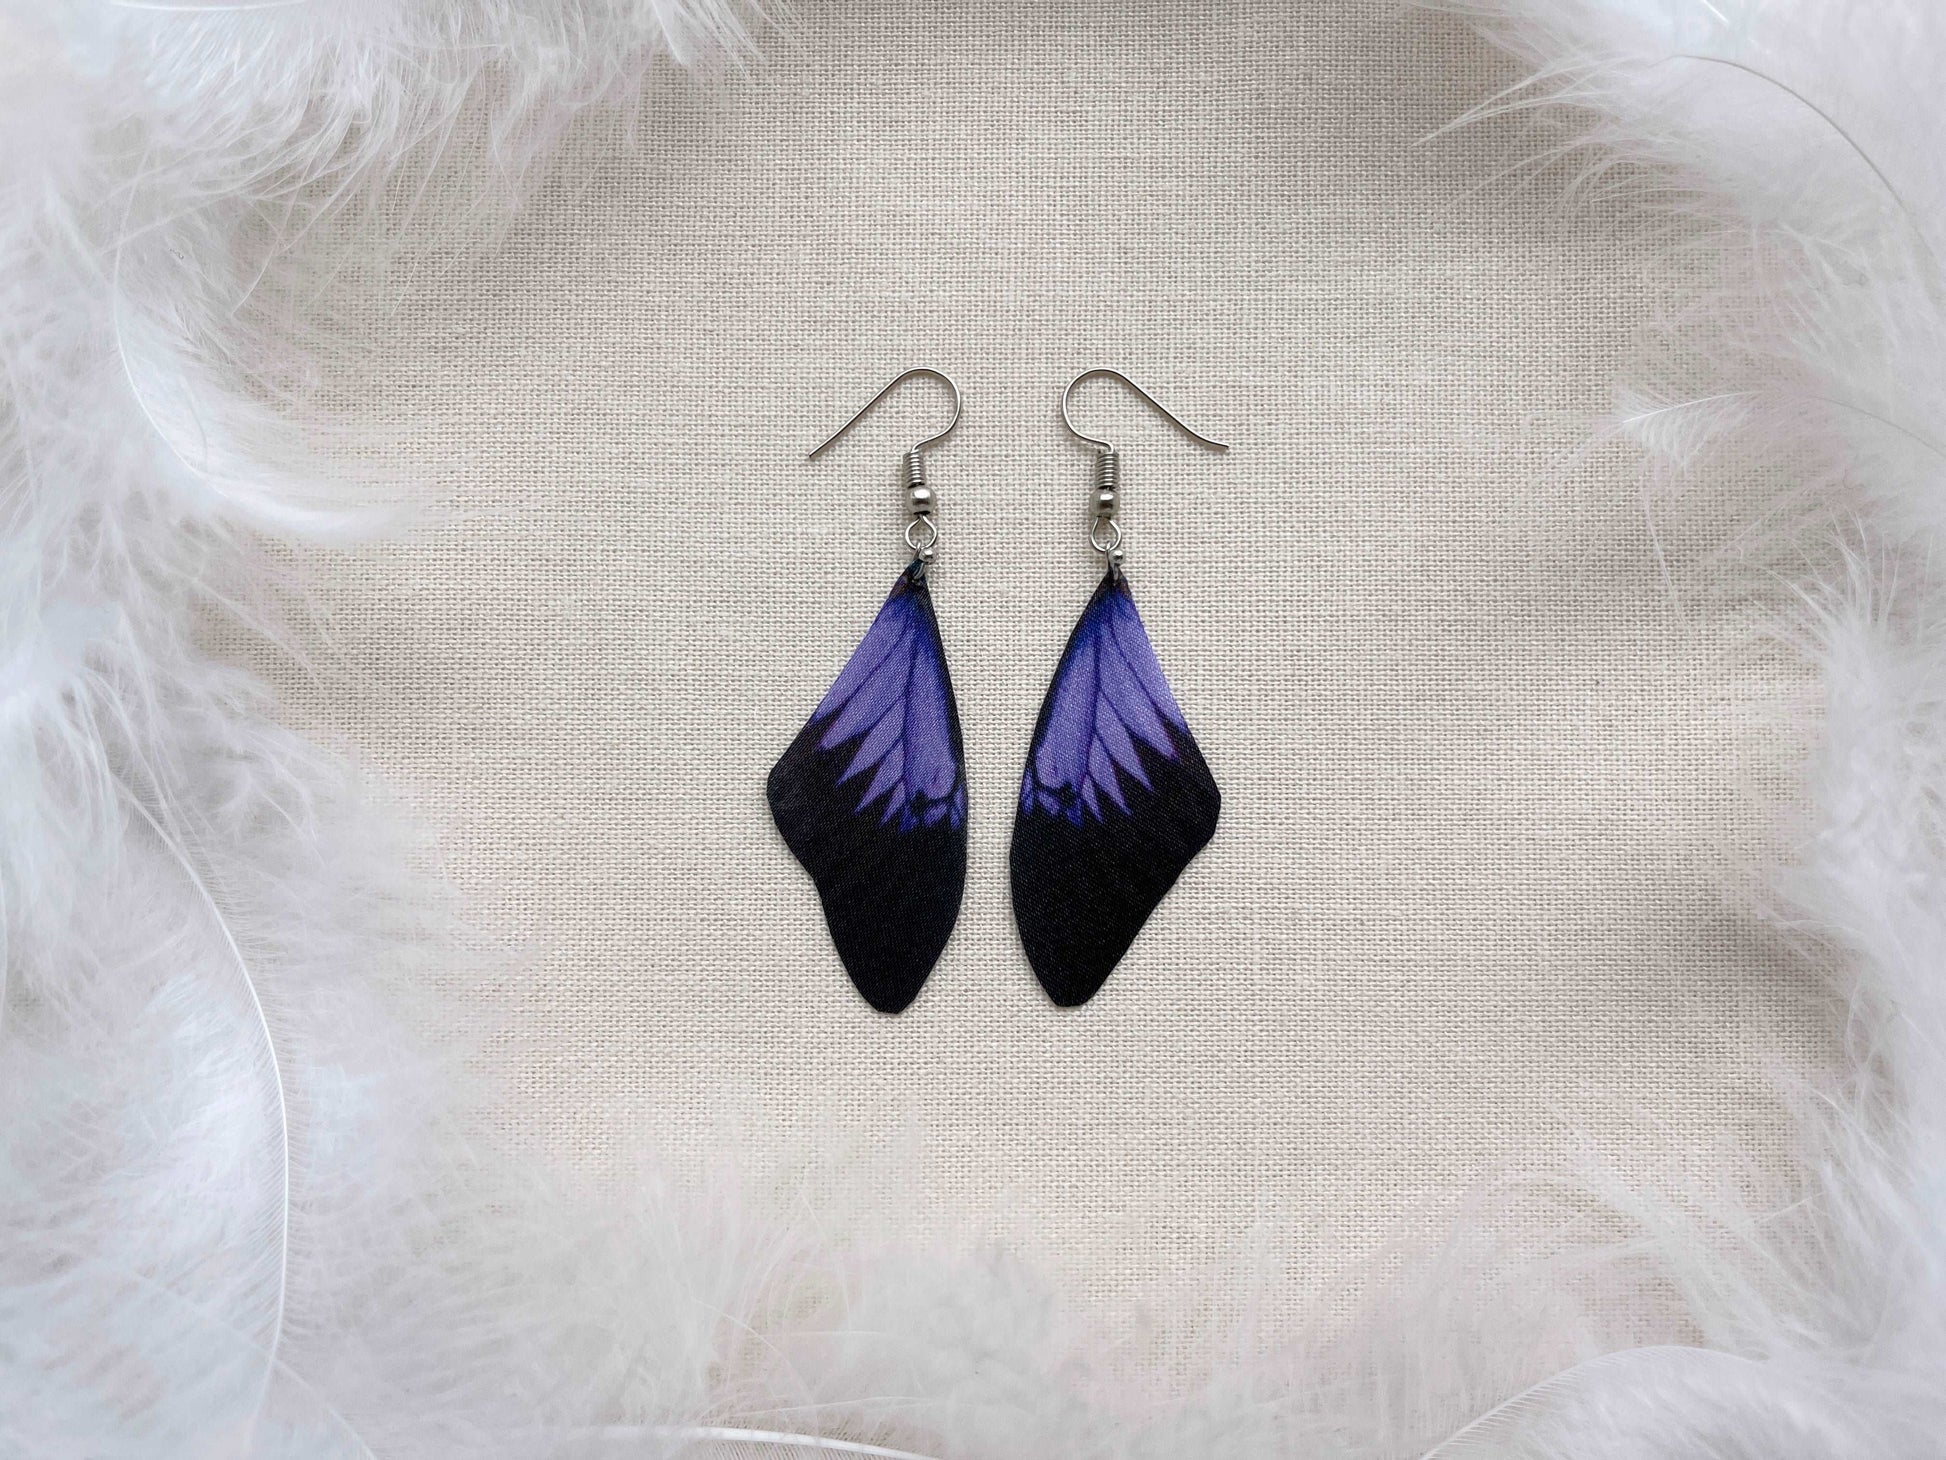 Lilac butterfly earrings with gold threader - statement piece for any outfit